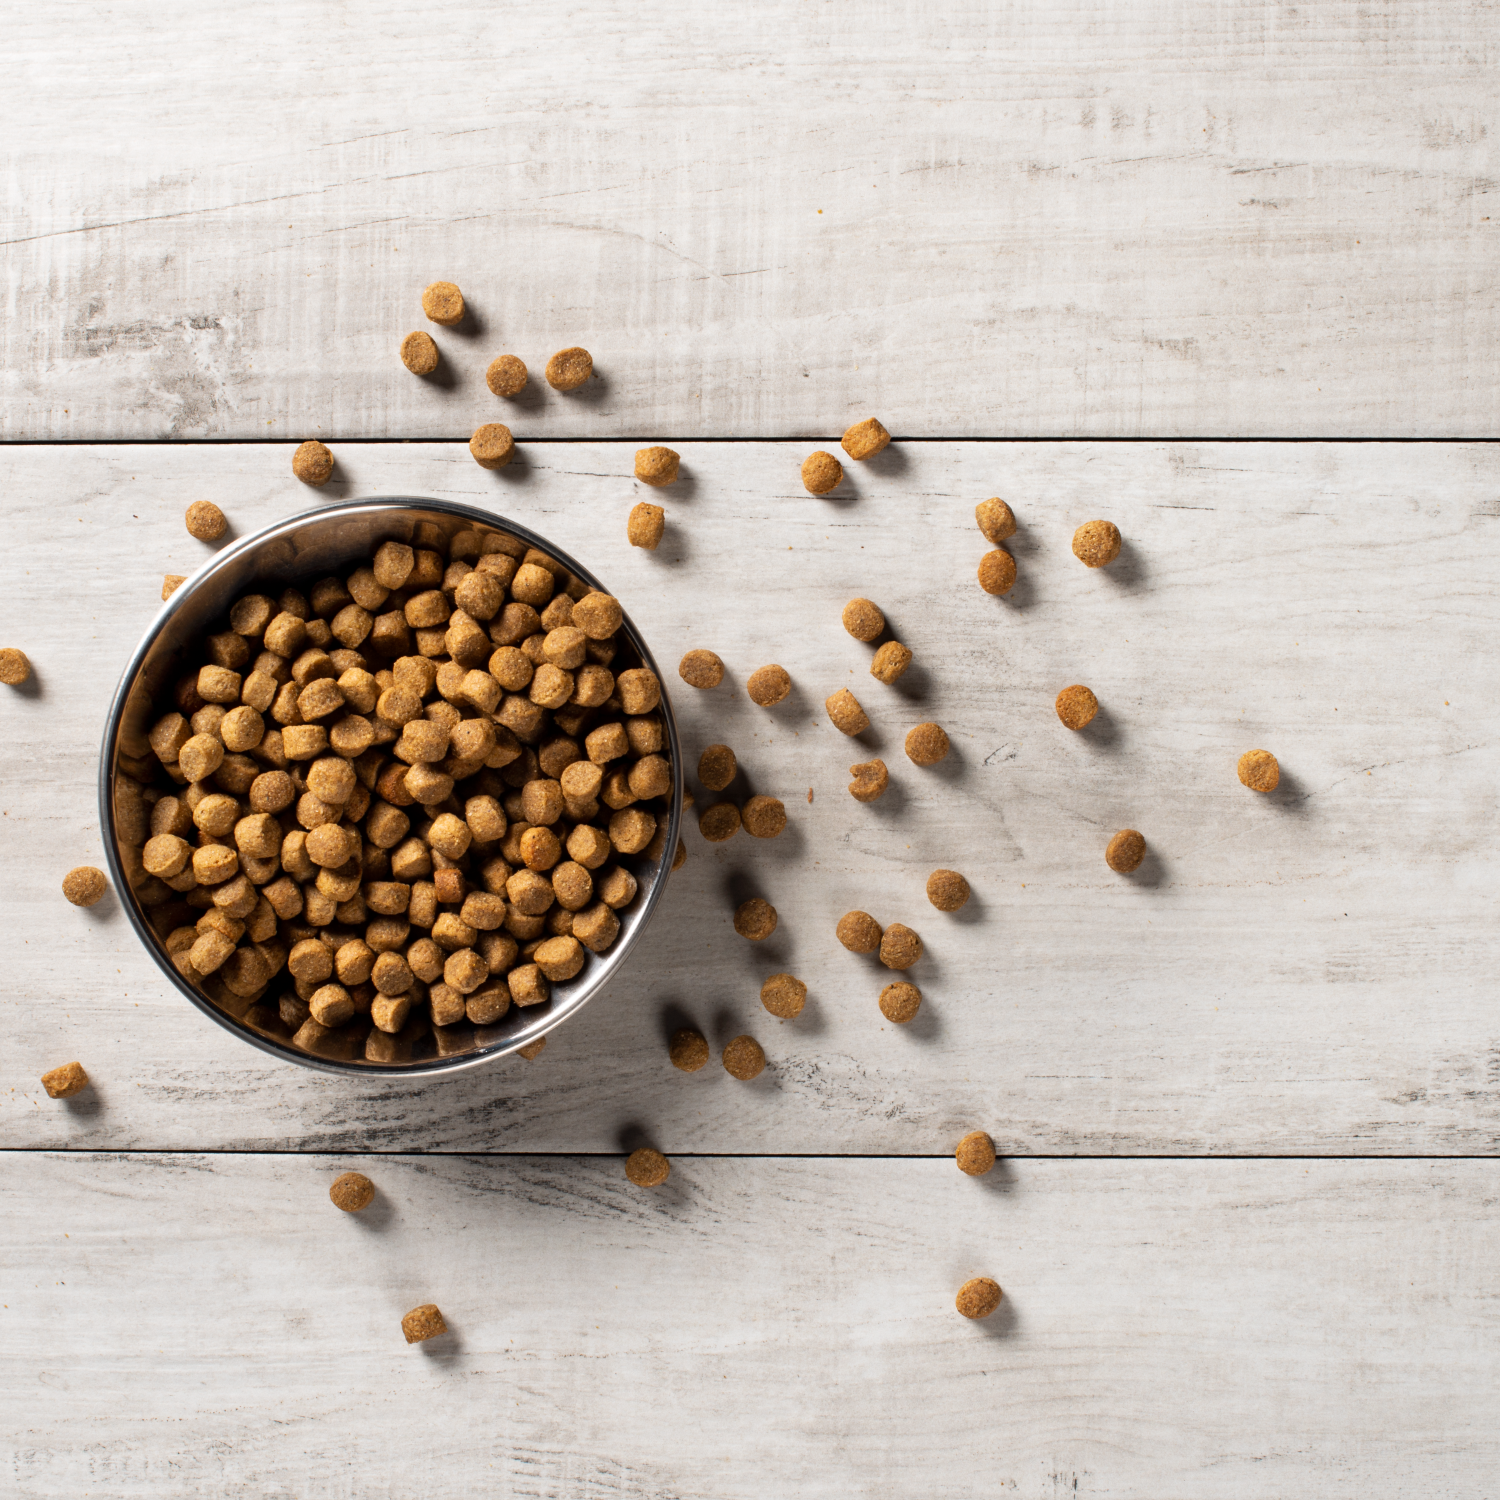 Chicken and rice dog kibble in a bowl and spilling onto a wooden background